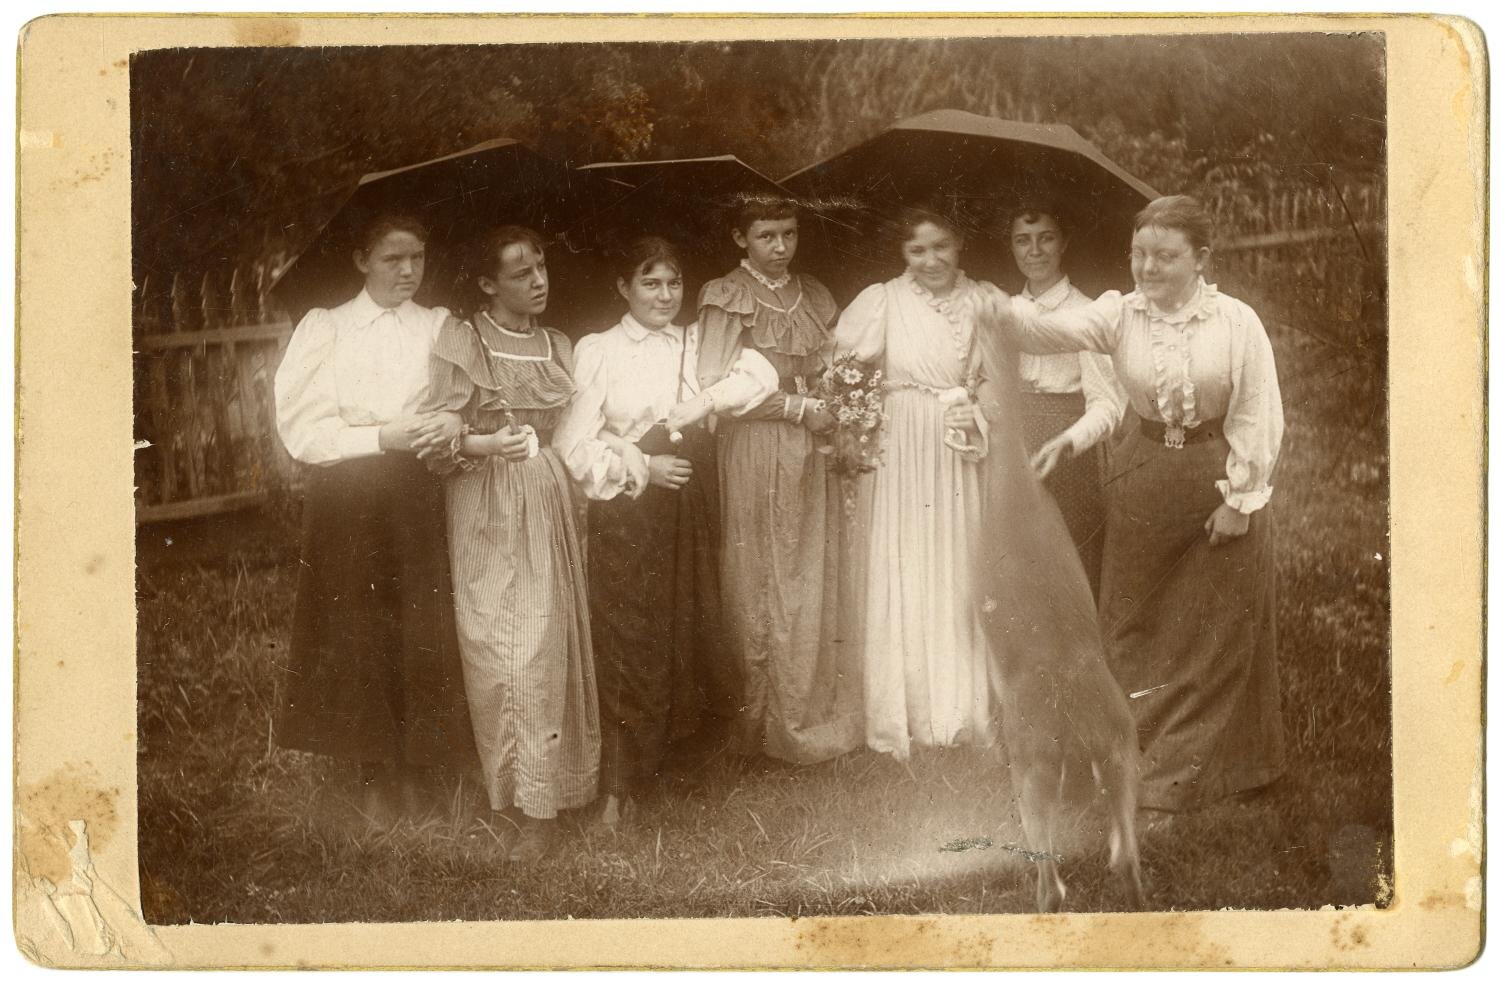  Functional dresses, skirts, and blouses were common in this region as evident in this photograph of women at the Lambshead Ranch in the Albany area, northeast of Abilene.  [Seven Women with Umbrellas and a Deer], photograph, 1896; ( https://texashis